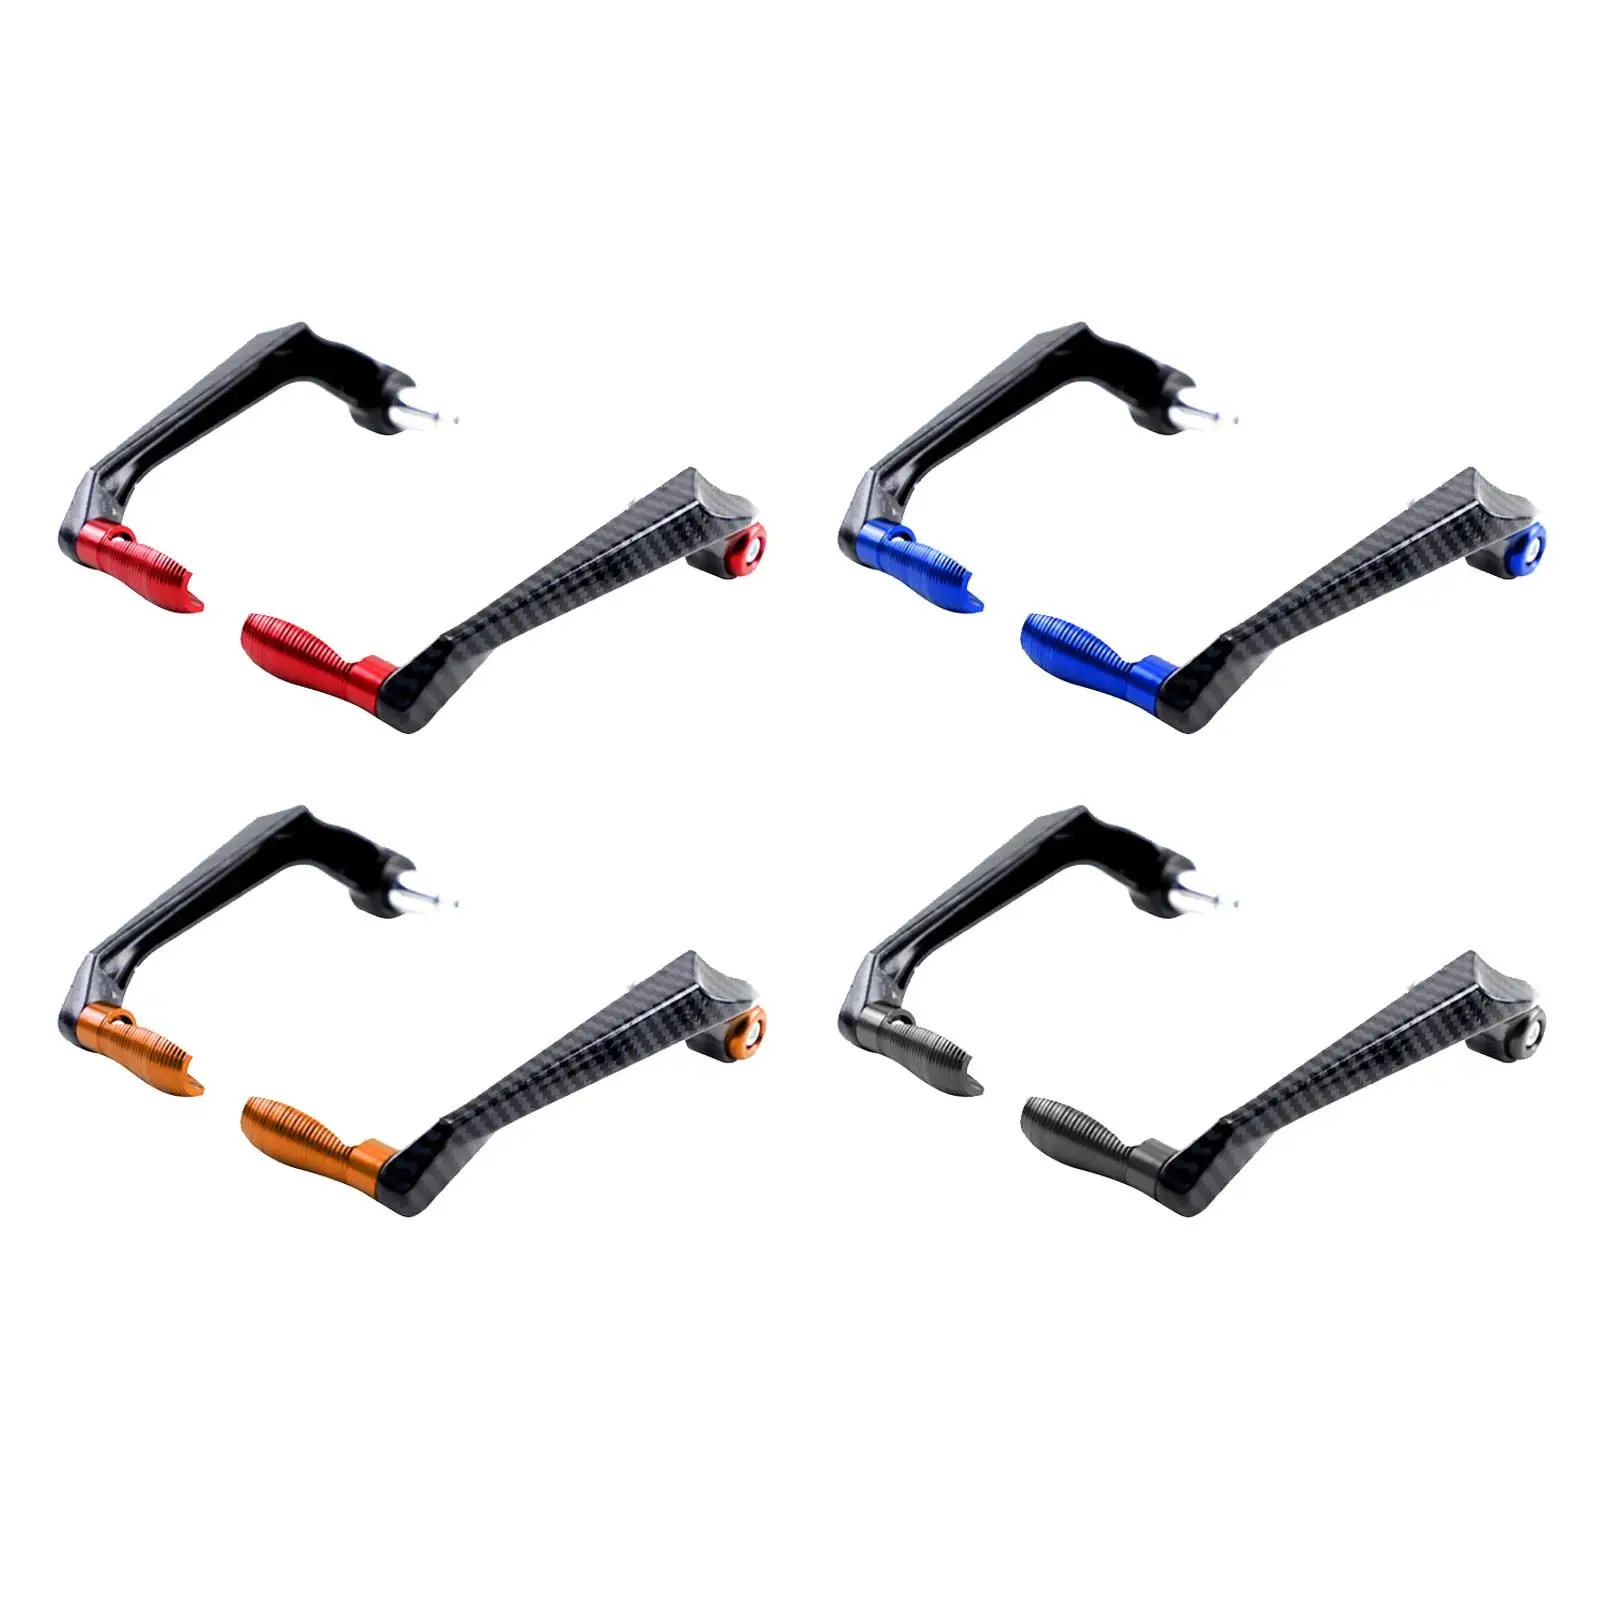 Universal Motorcycle Brake Clutch Lever Guards Handlebar / Protective Guard/ Metal 7/8 inch Falling  Accessory Motorbike